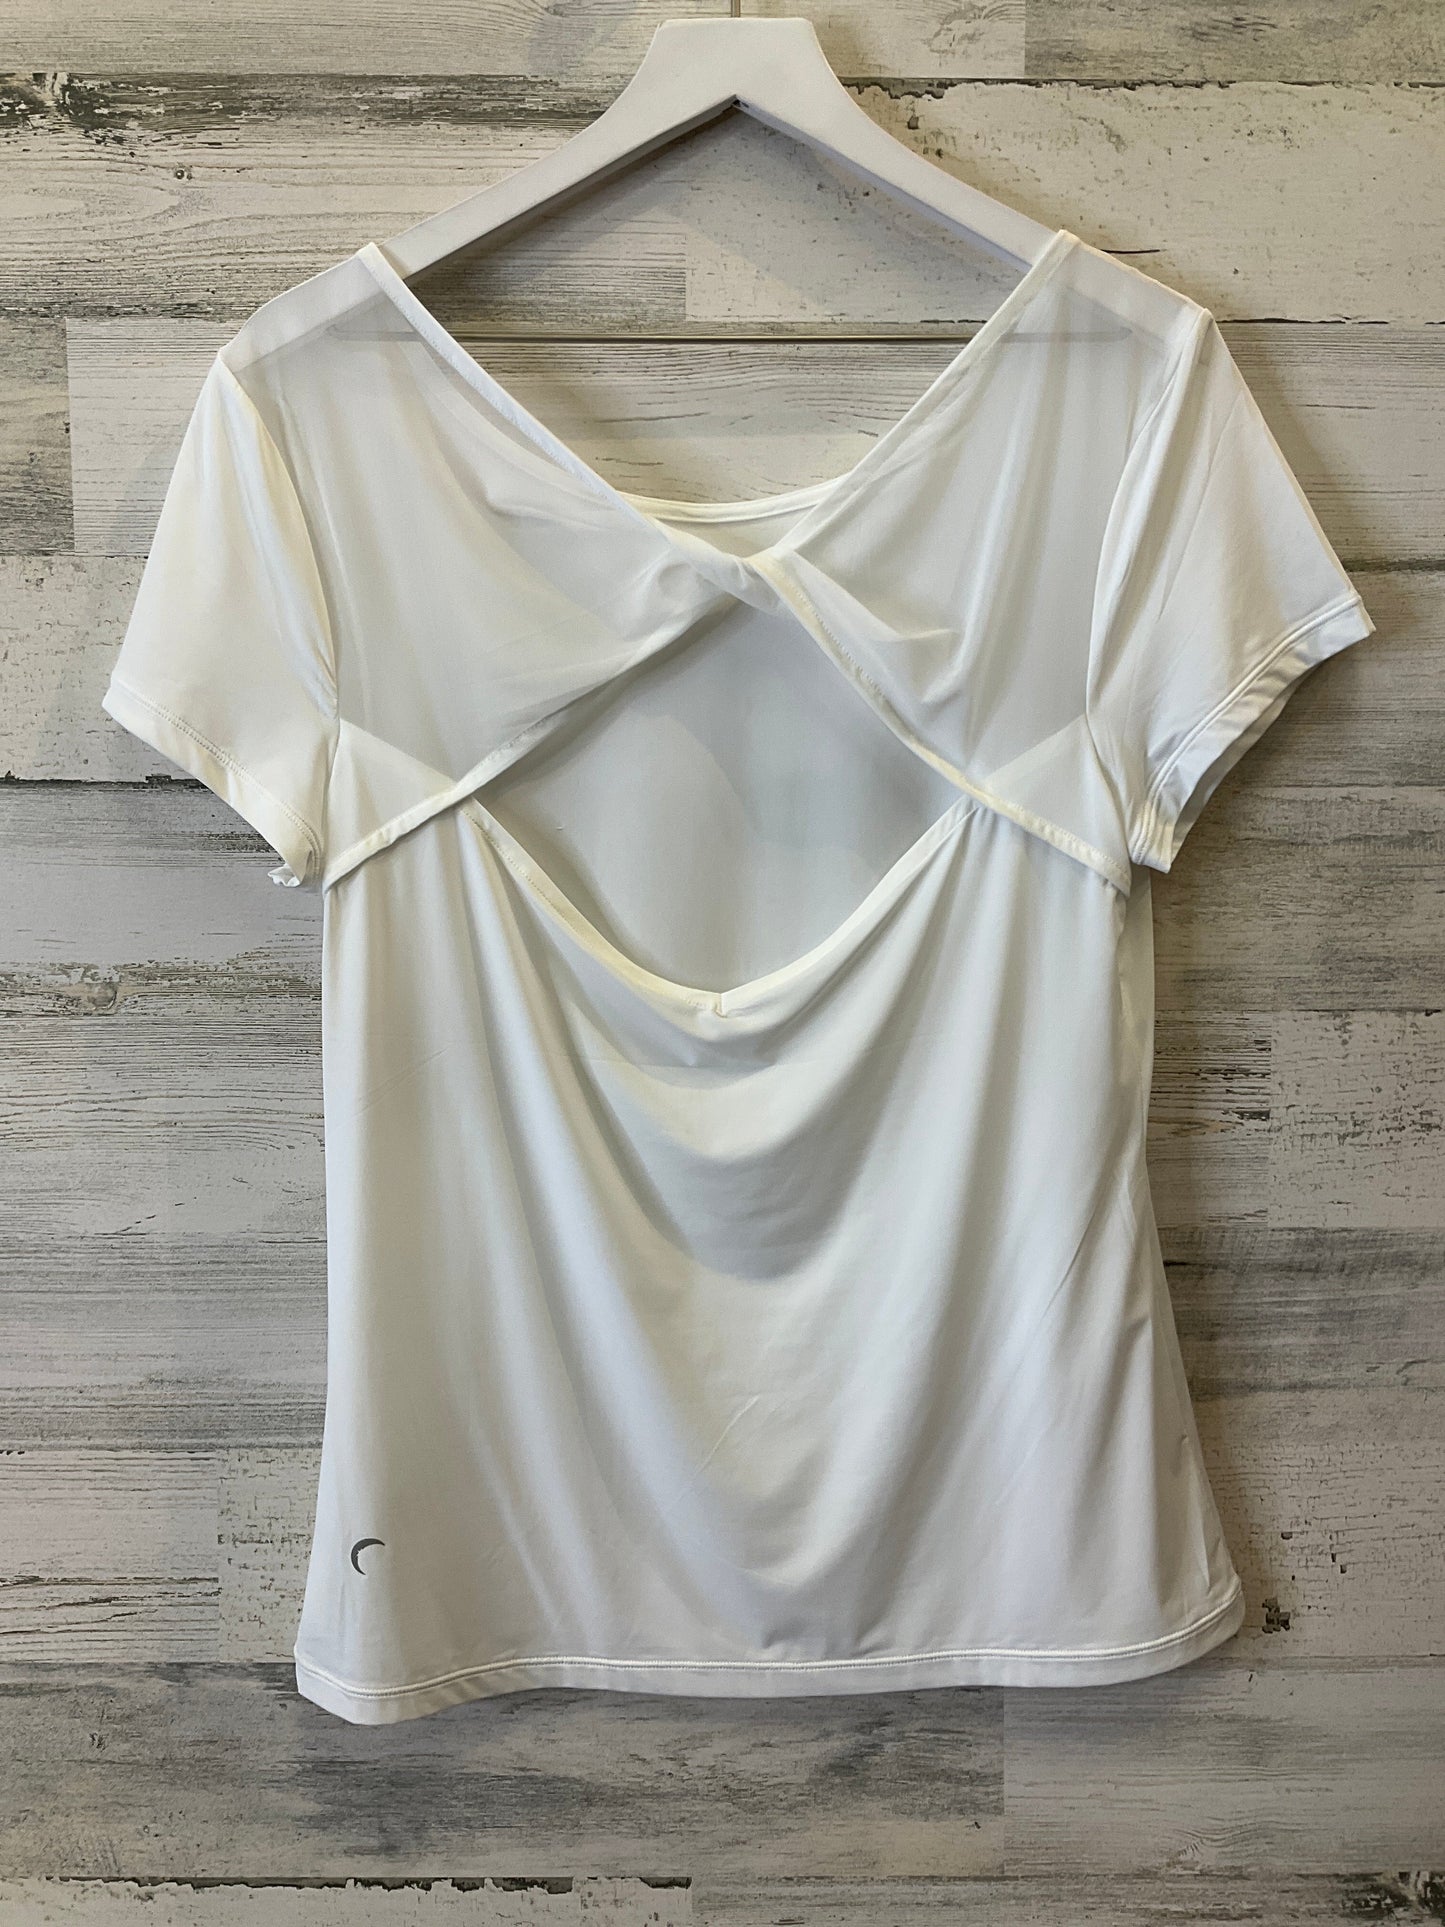 White Athletic Top Short Sleeve Zyia, Size L